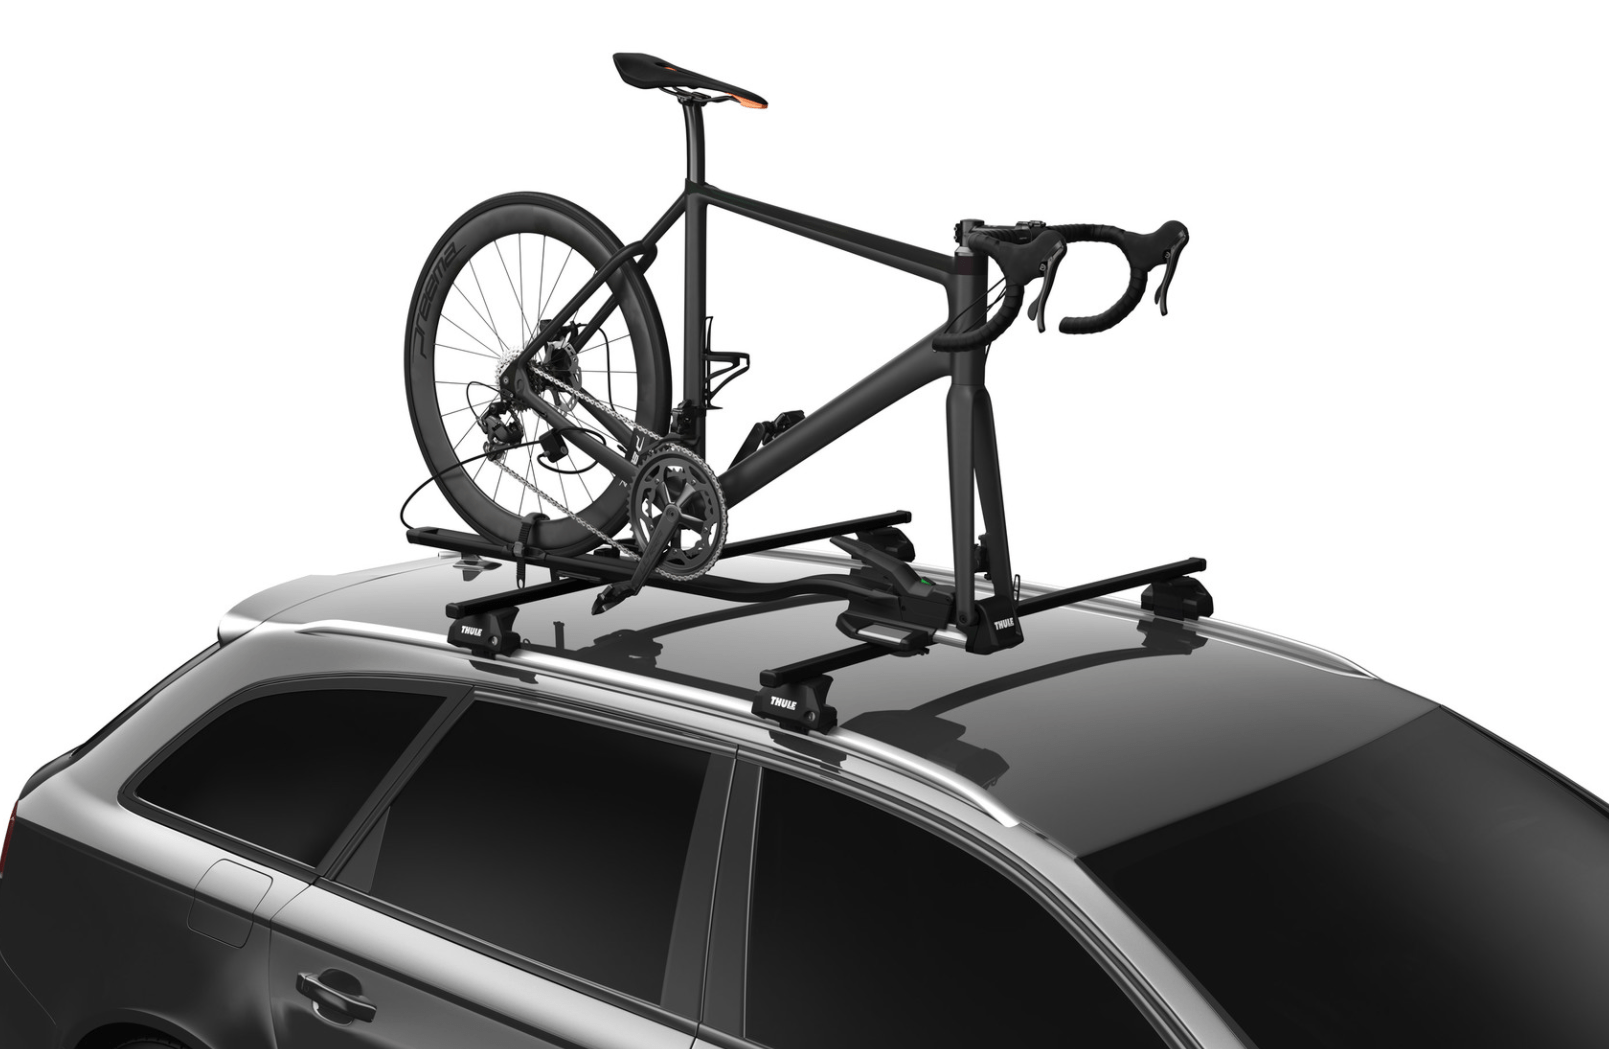 Thule FastRide & TopRide Around-the-bar Adapter - Letang Auto Electrical Vehicle Parts